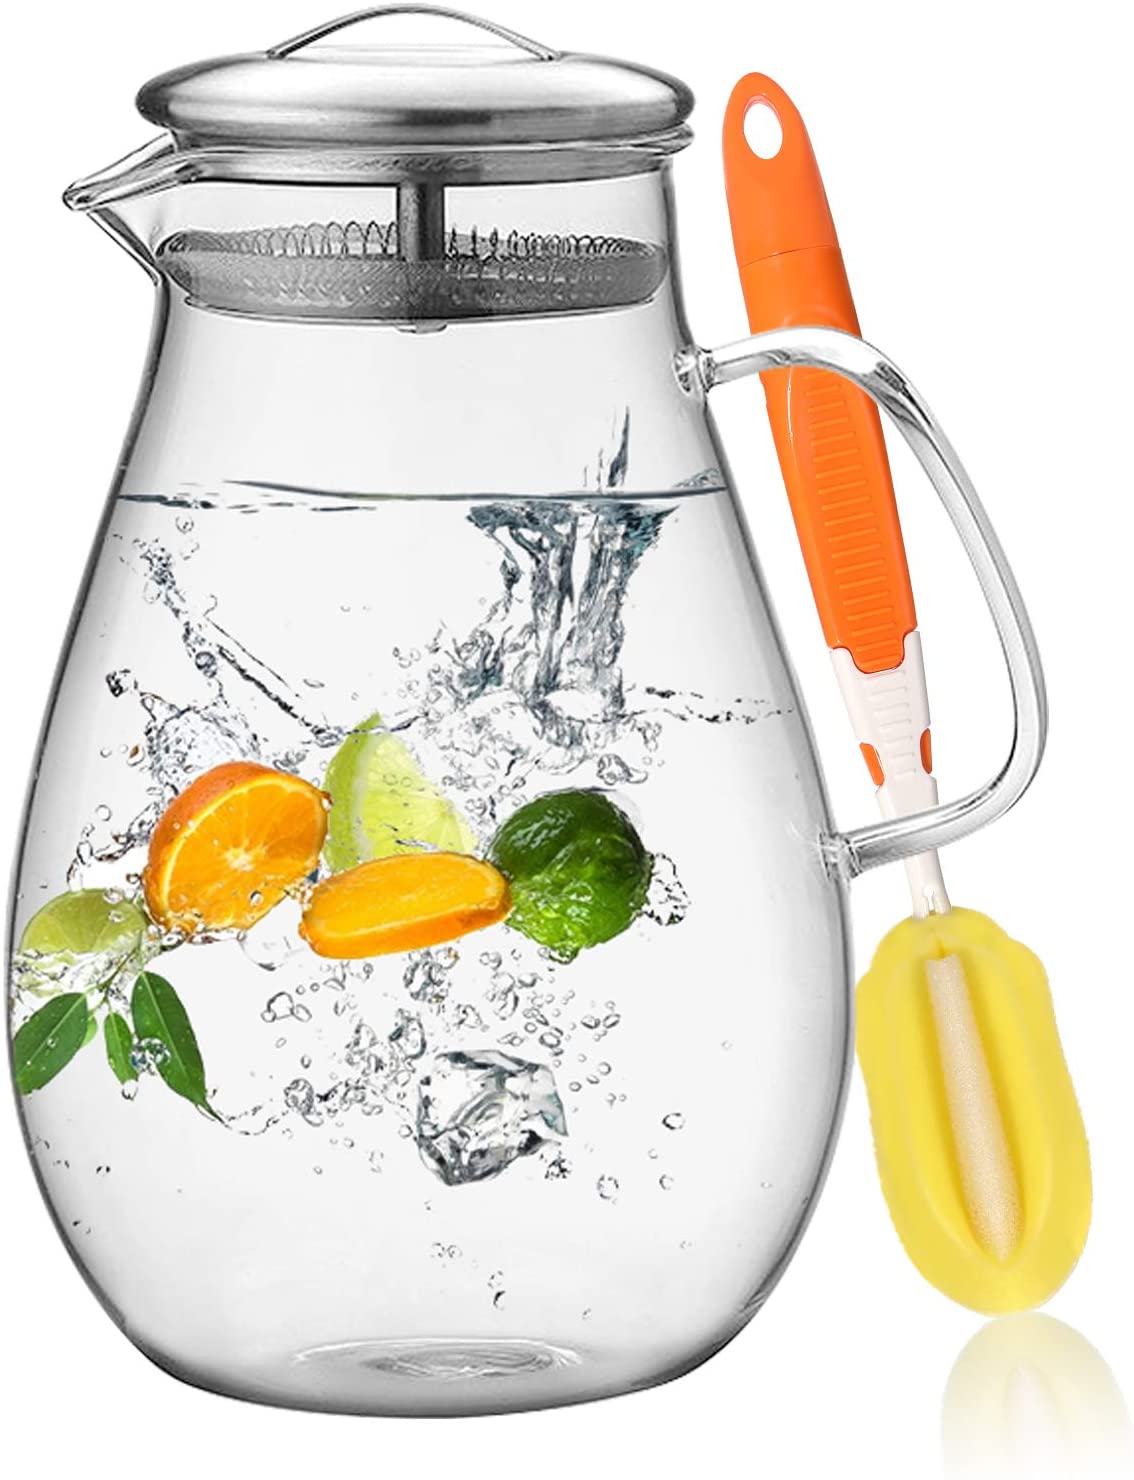 https://www.dontwasteyourmoney.com/wp-content/uploads/2021/03/hiware-stainless-steel-lid-glass-pitcher-64-ounce-glass-pitcher.jpg